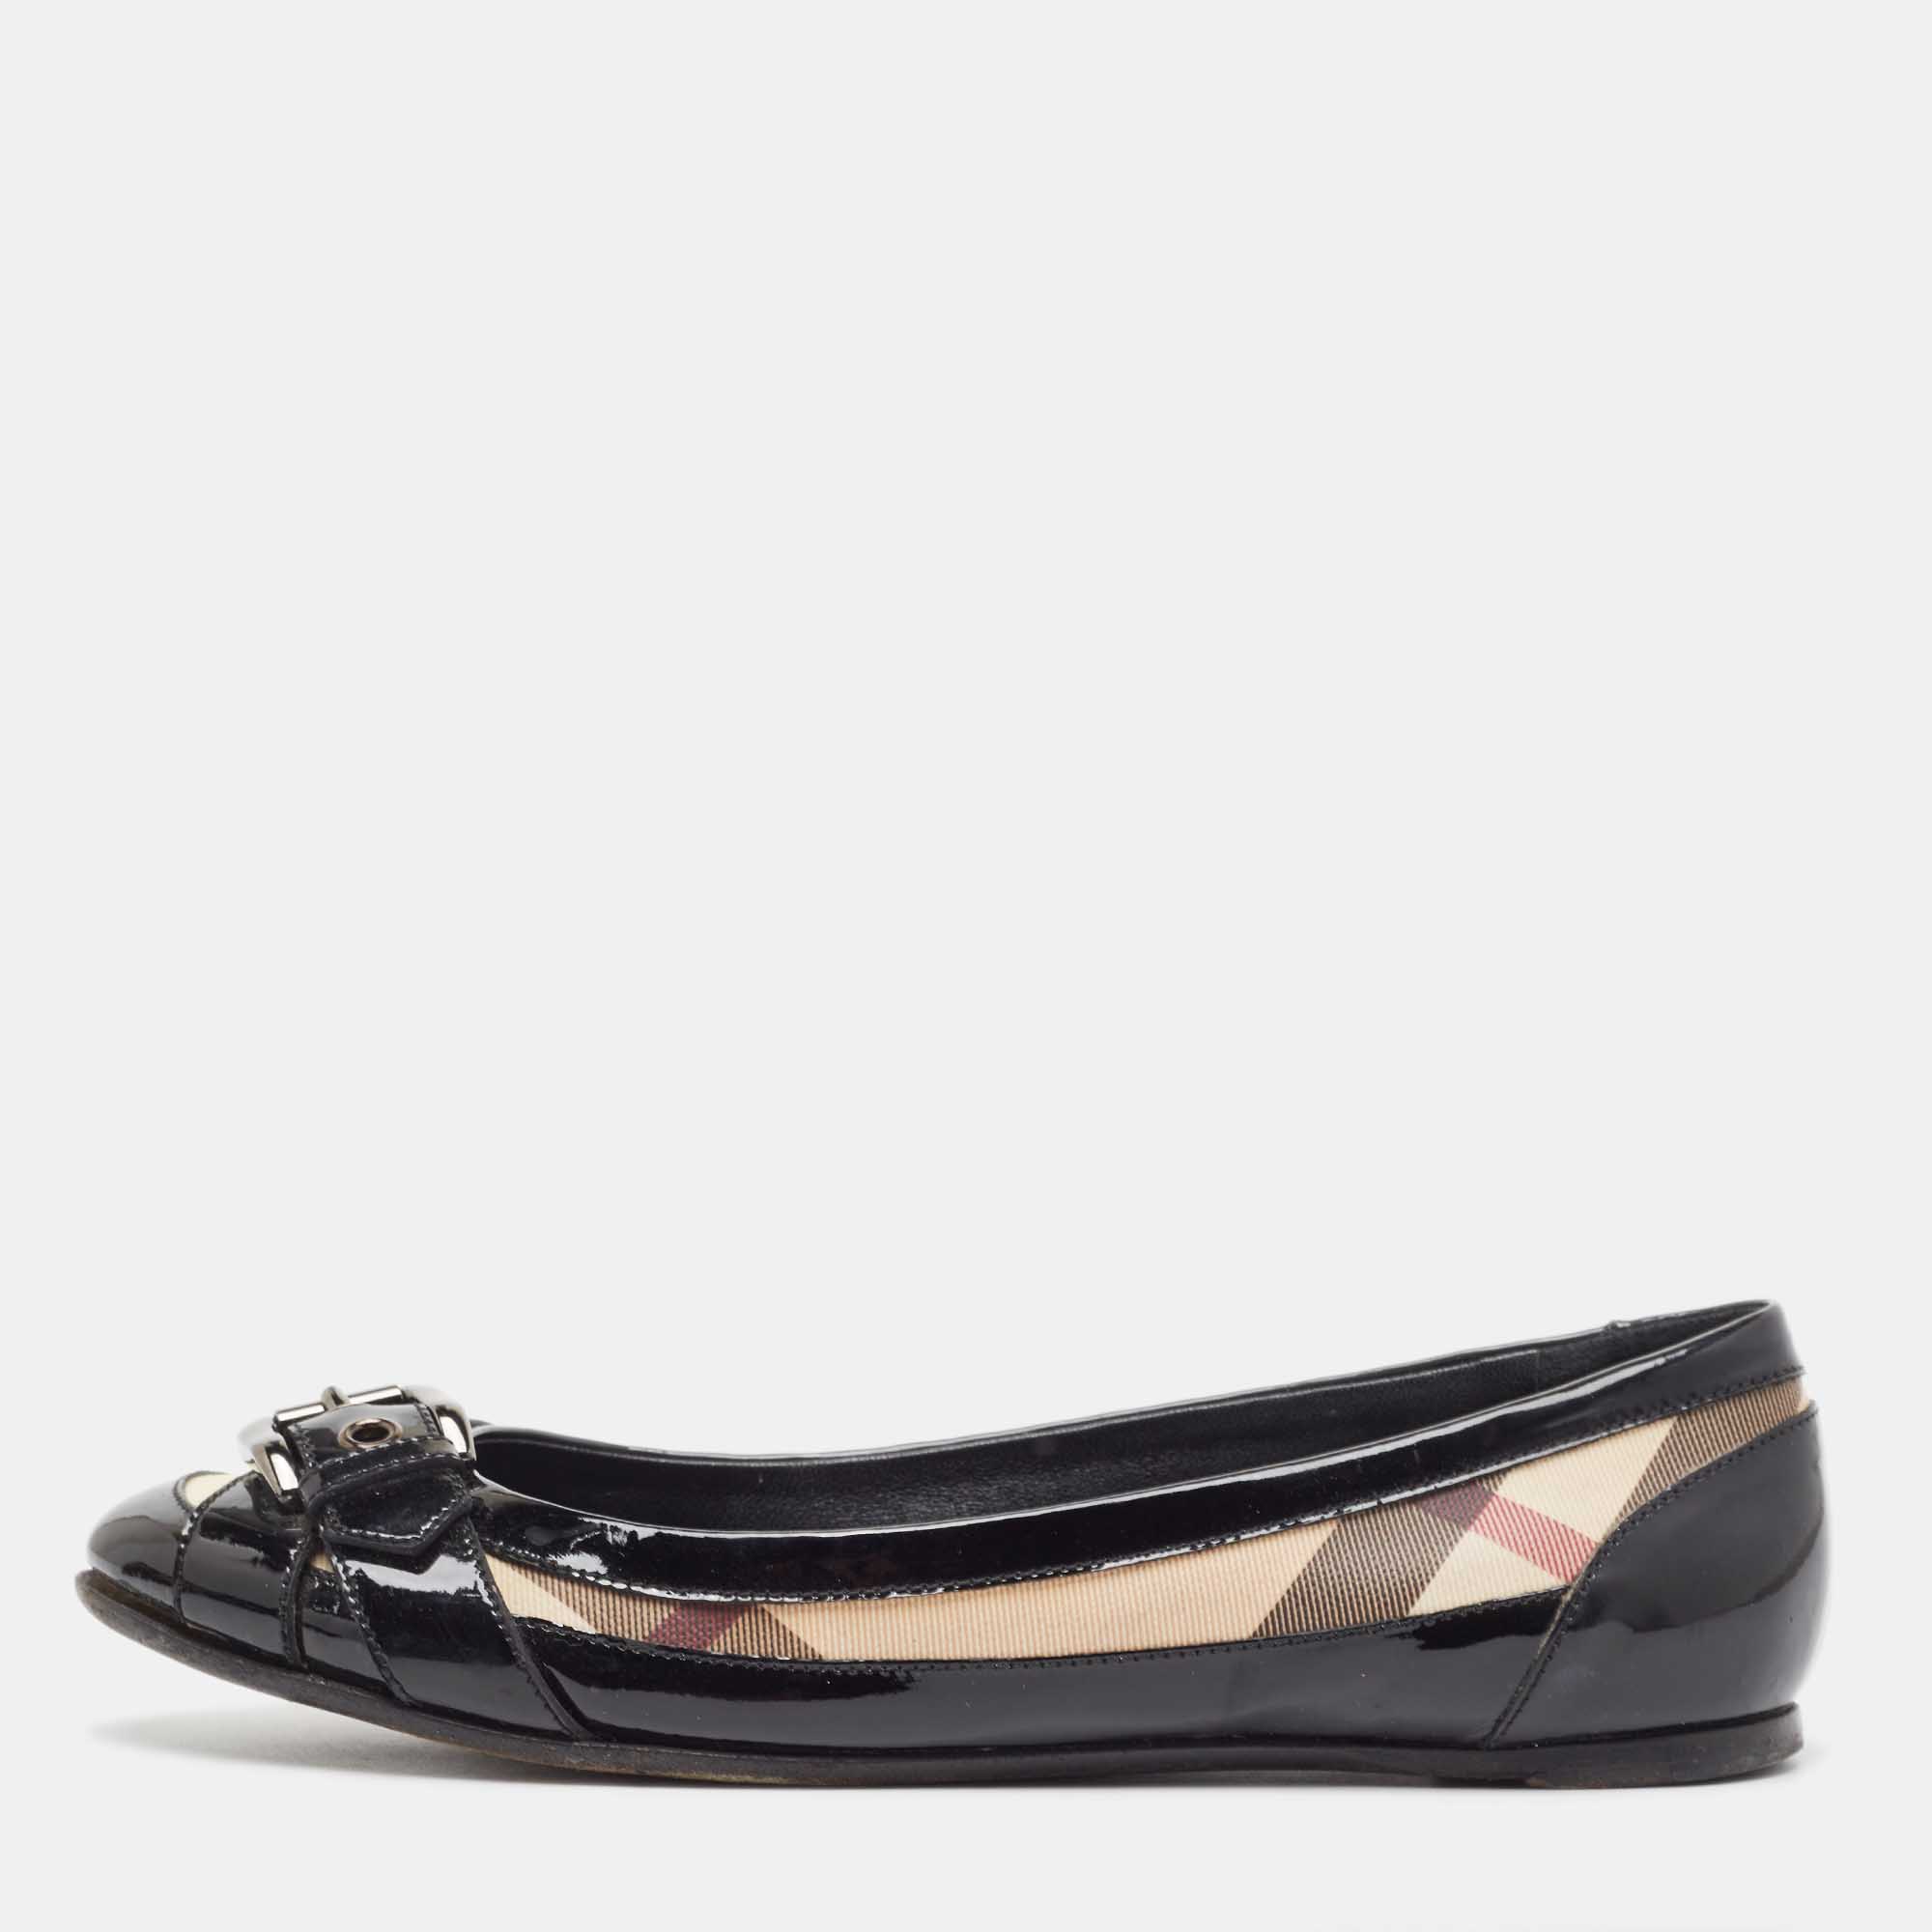 Pre-owned Burberry Black/beige Nova Check Pvc And Patent Leather Buckle Ballet Flats Size 38